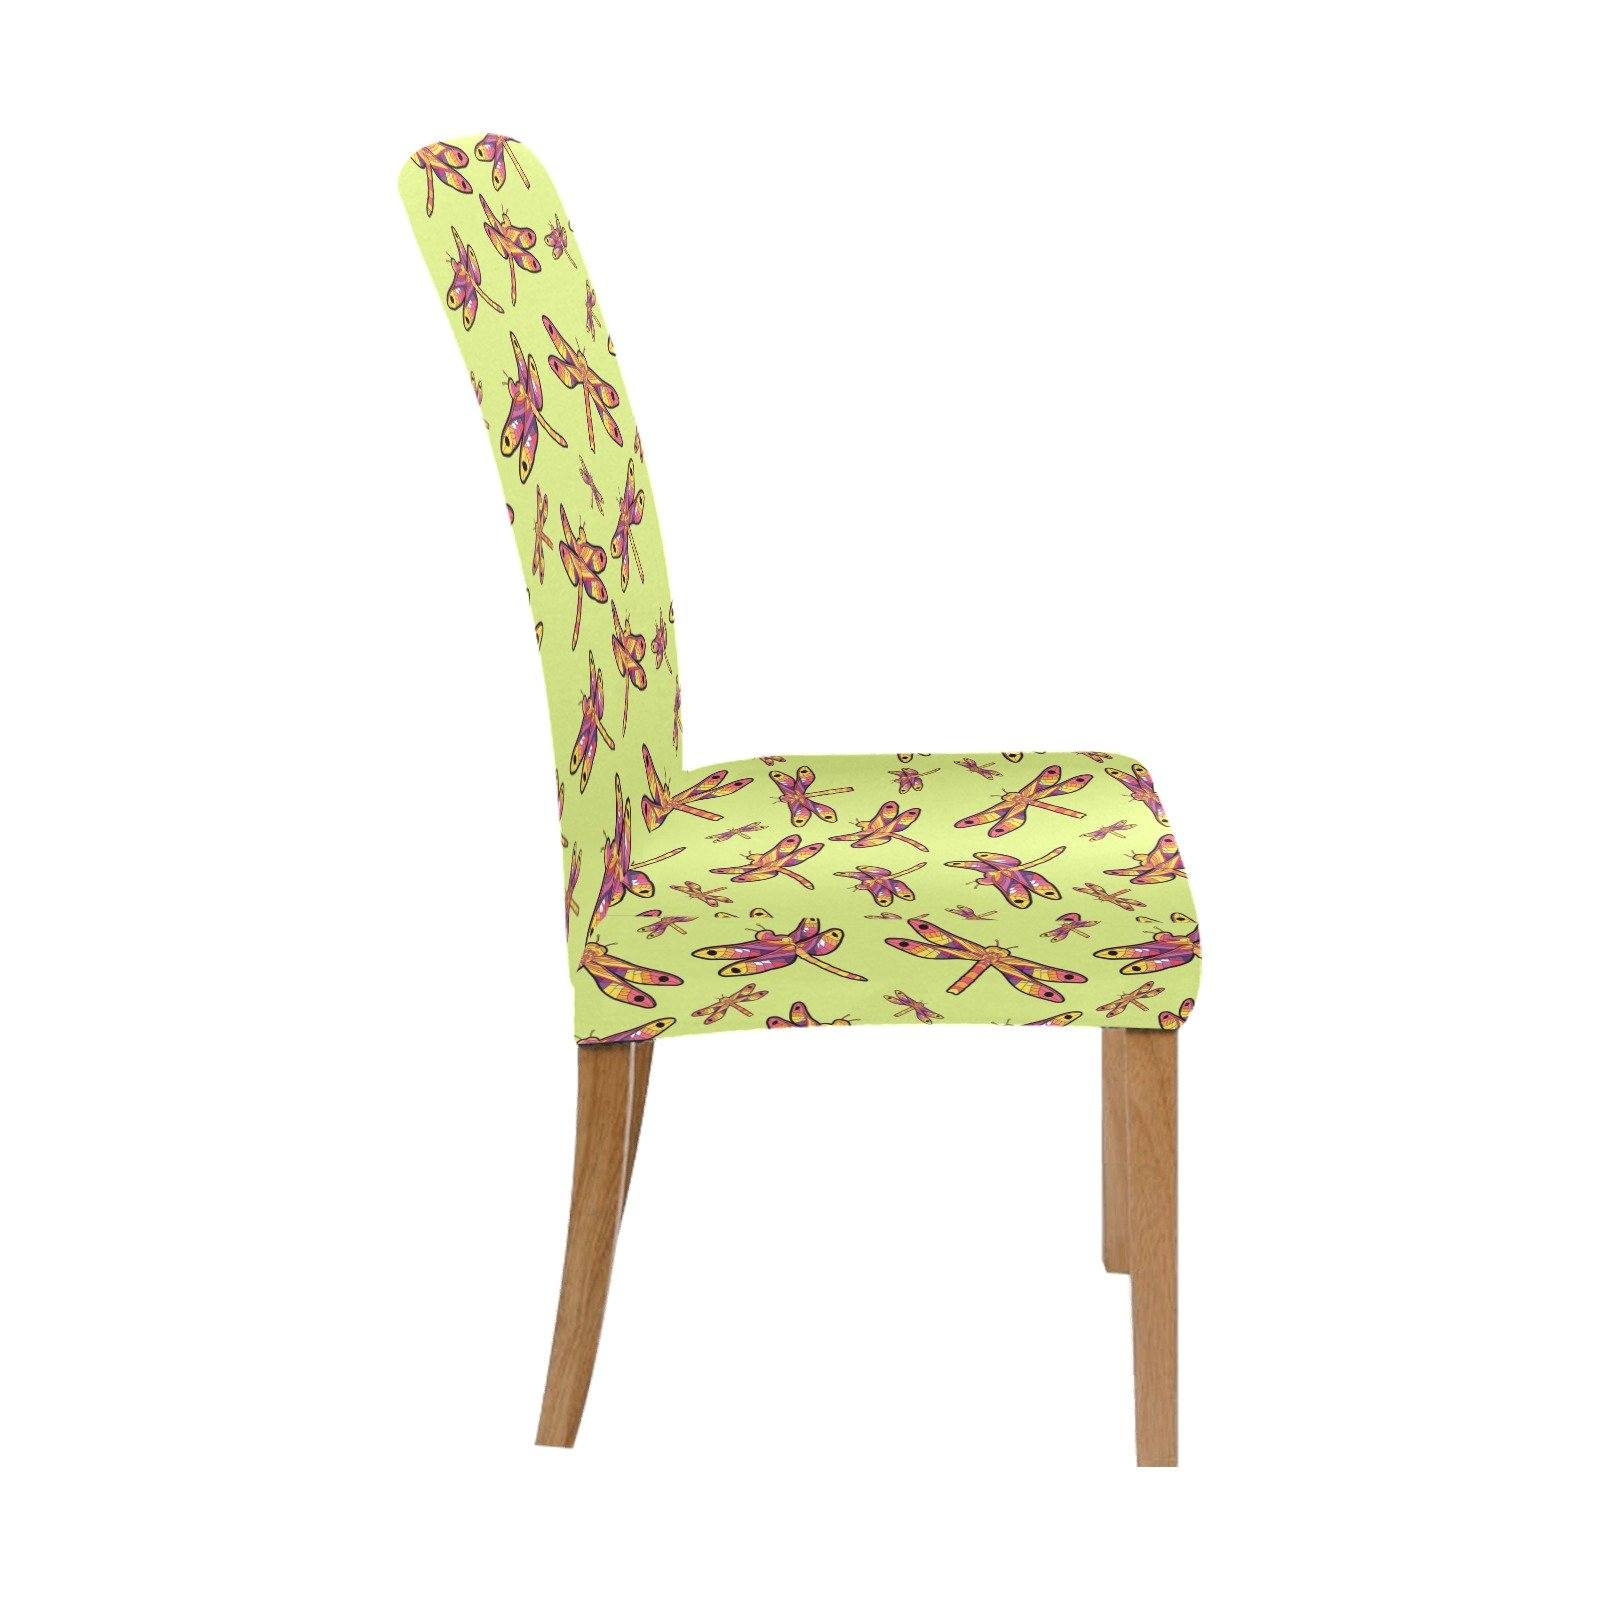 Gathering Lime Chair Cover (Pack of 4) Chair Cover (Pack of 4) e-joyer 